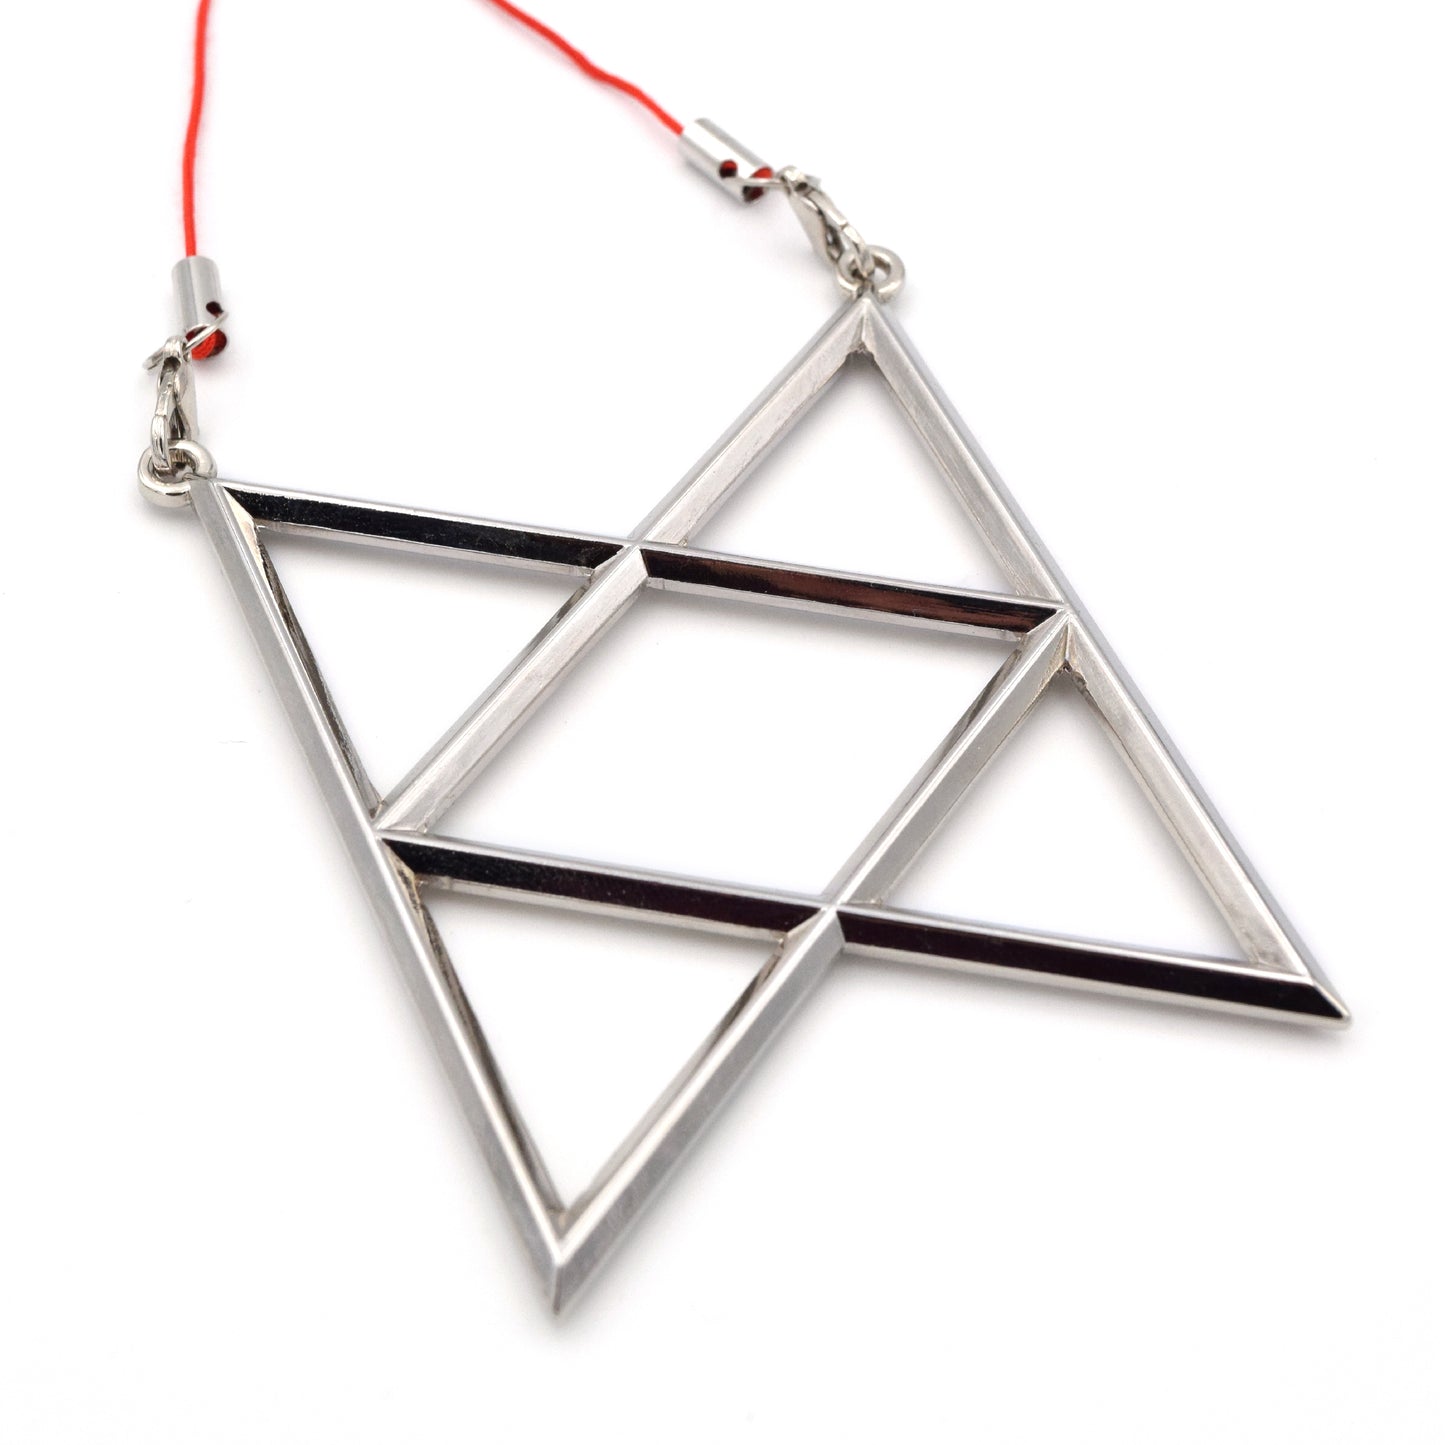 A silver metal ornament is the shape of the BoB symbol. The hanger is a red thread that strings across the top two points.